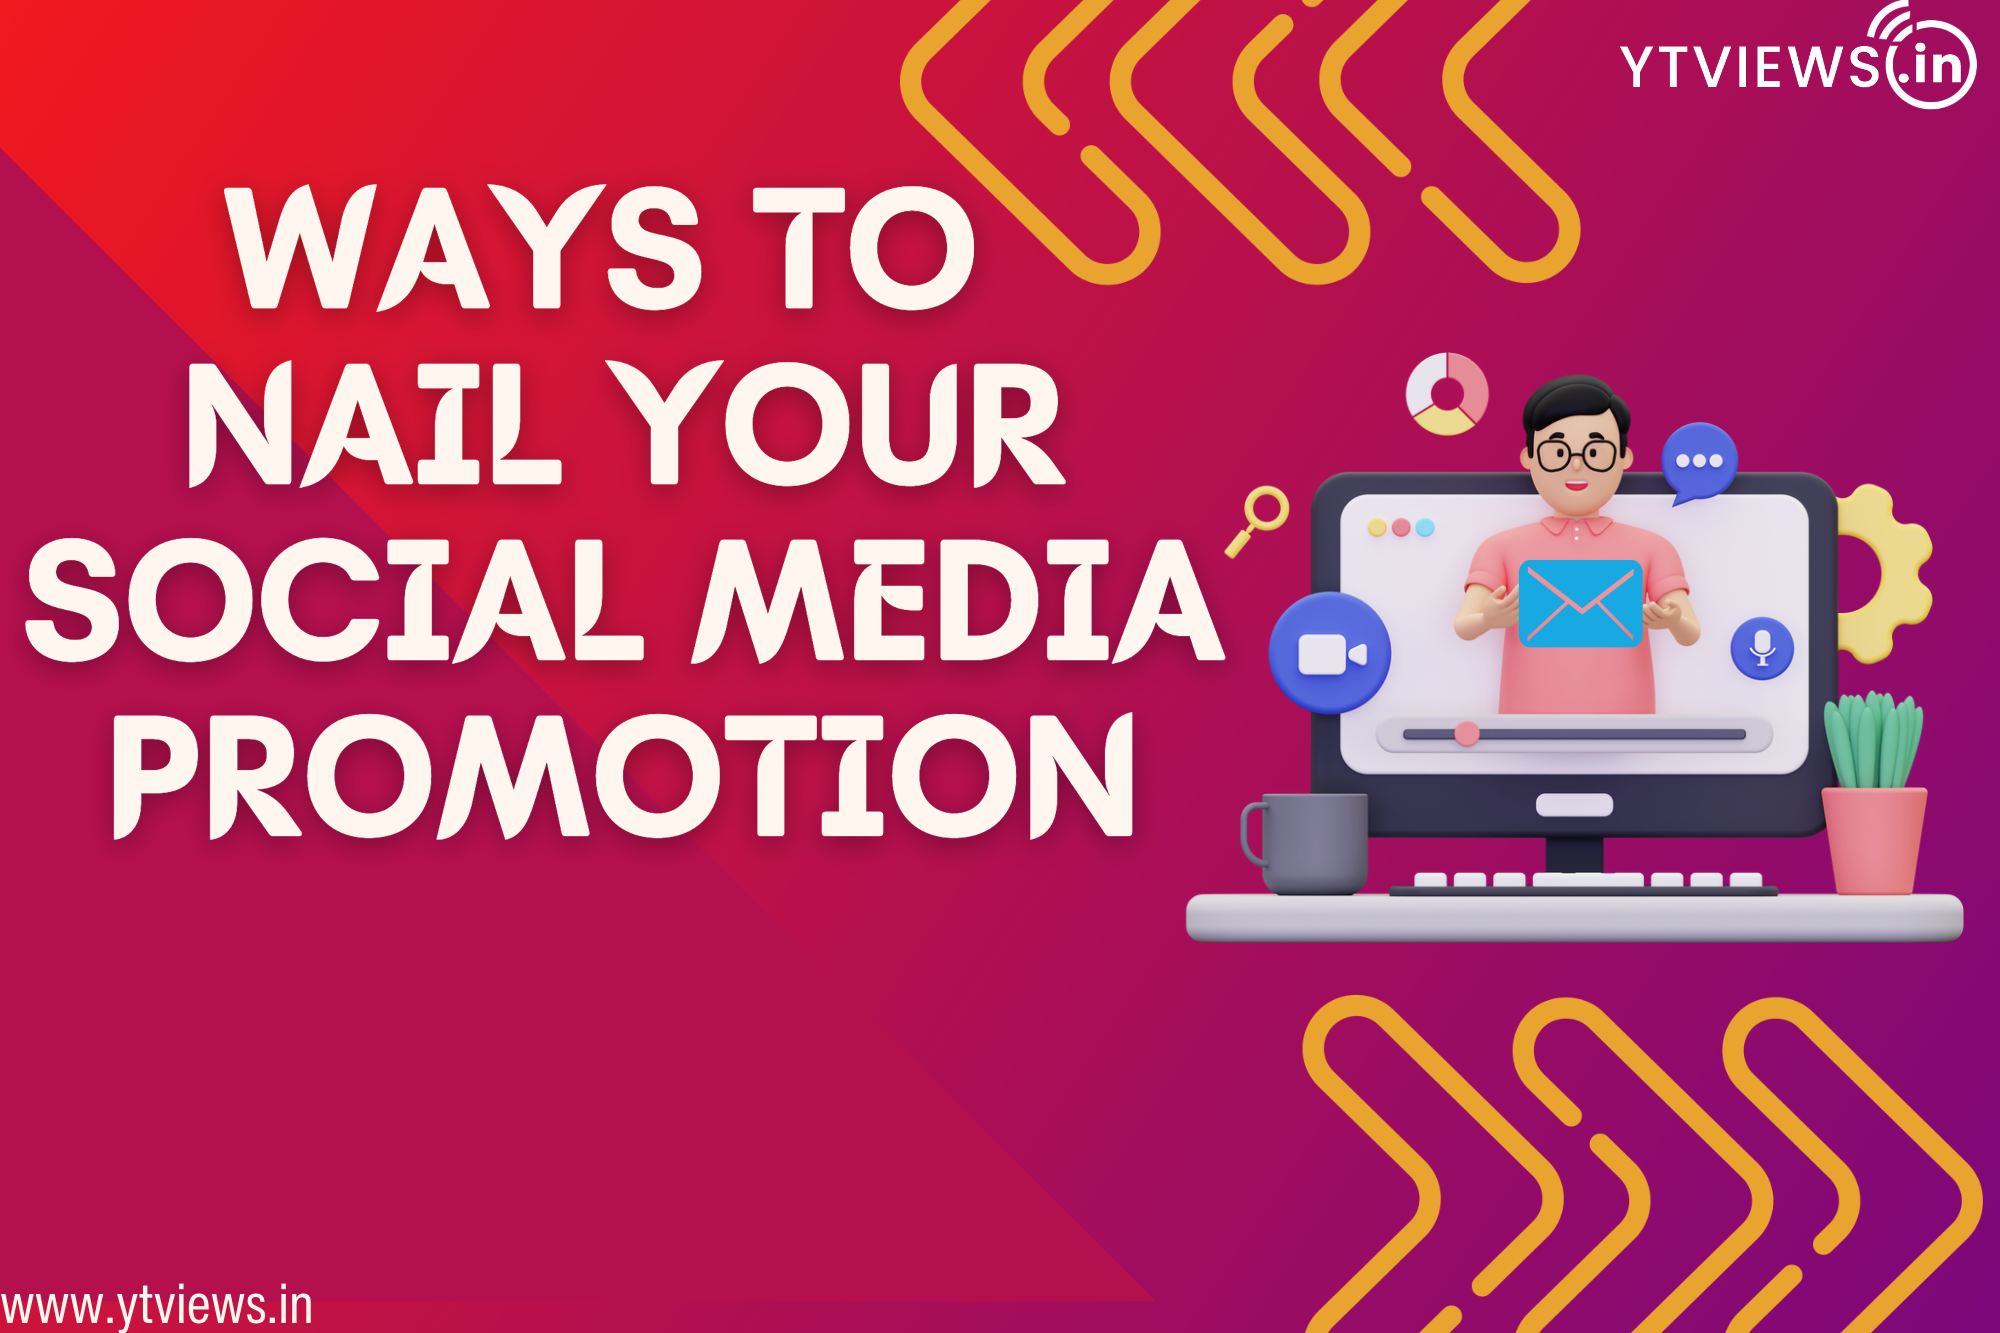 11 Ways to Nail your Social Media Promotion with Ytviews